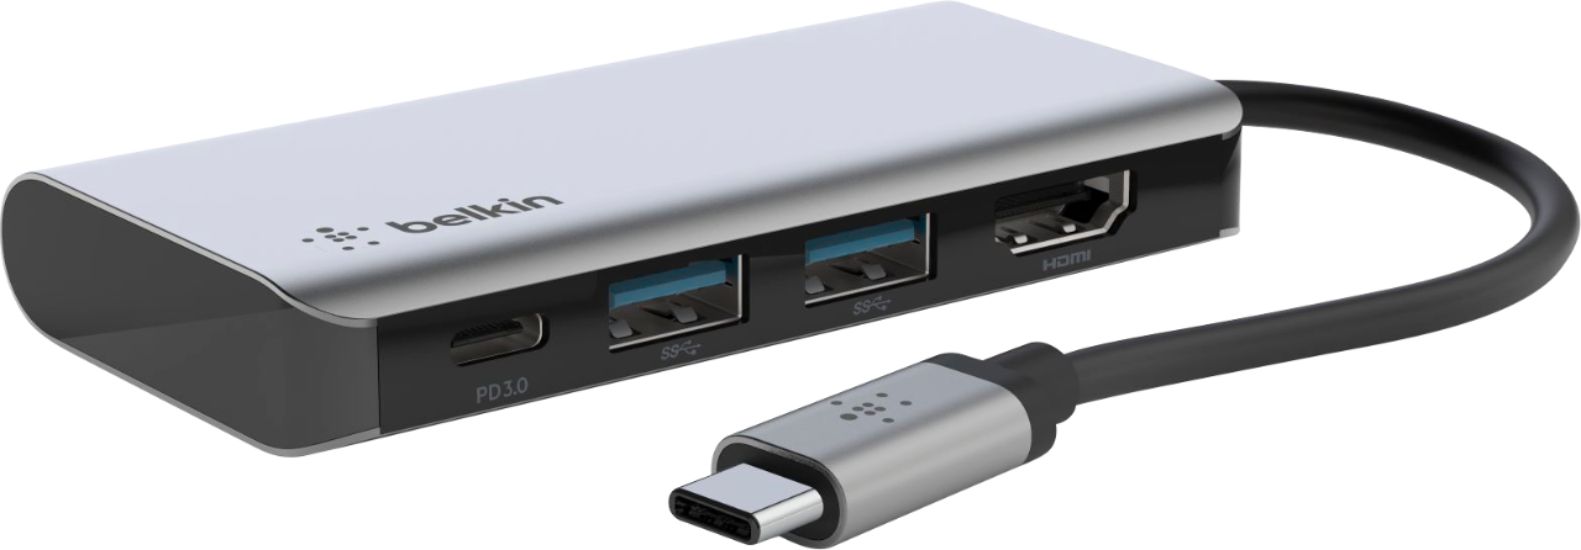 Belkin USB C Hub 4-in-1 Multi-Port Laptop Dock with 4K HDMI, Docking  Station with 100W Power Delivery for Mac, PC, and More Gray AVC006btSGY -  Best Buy